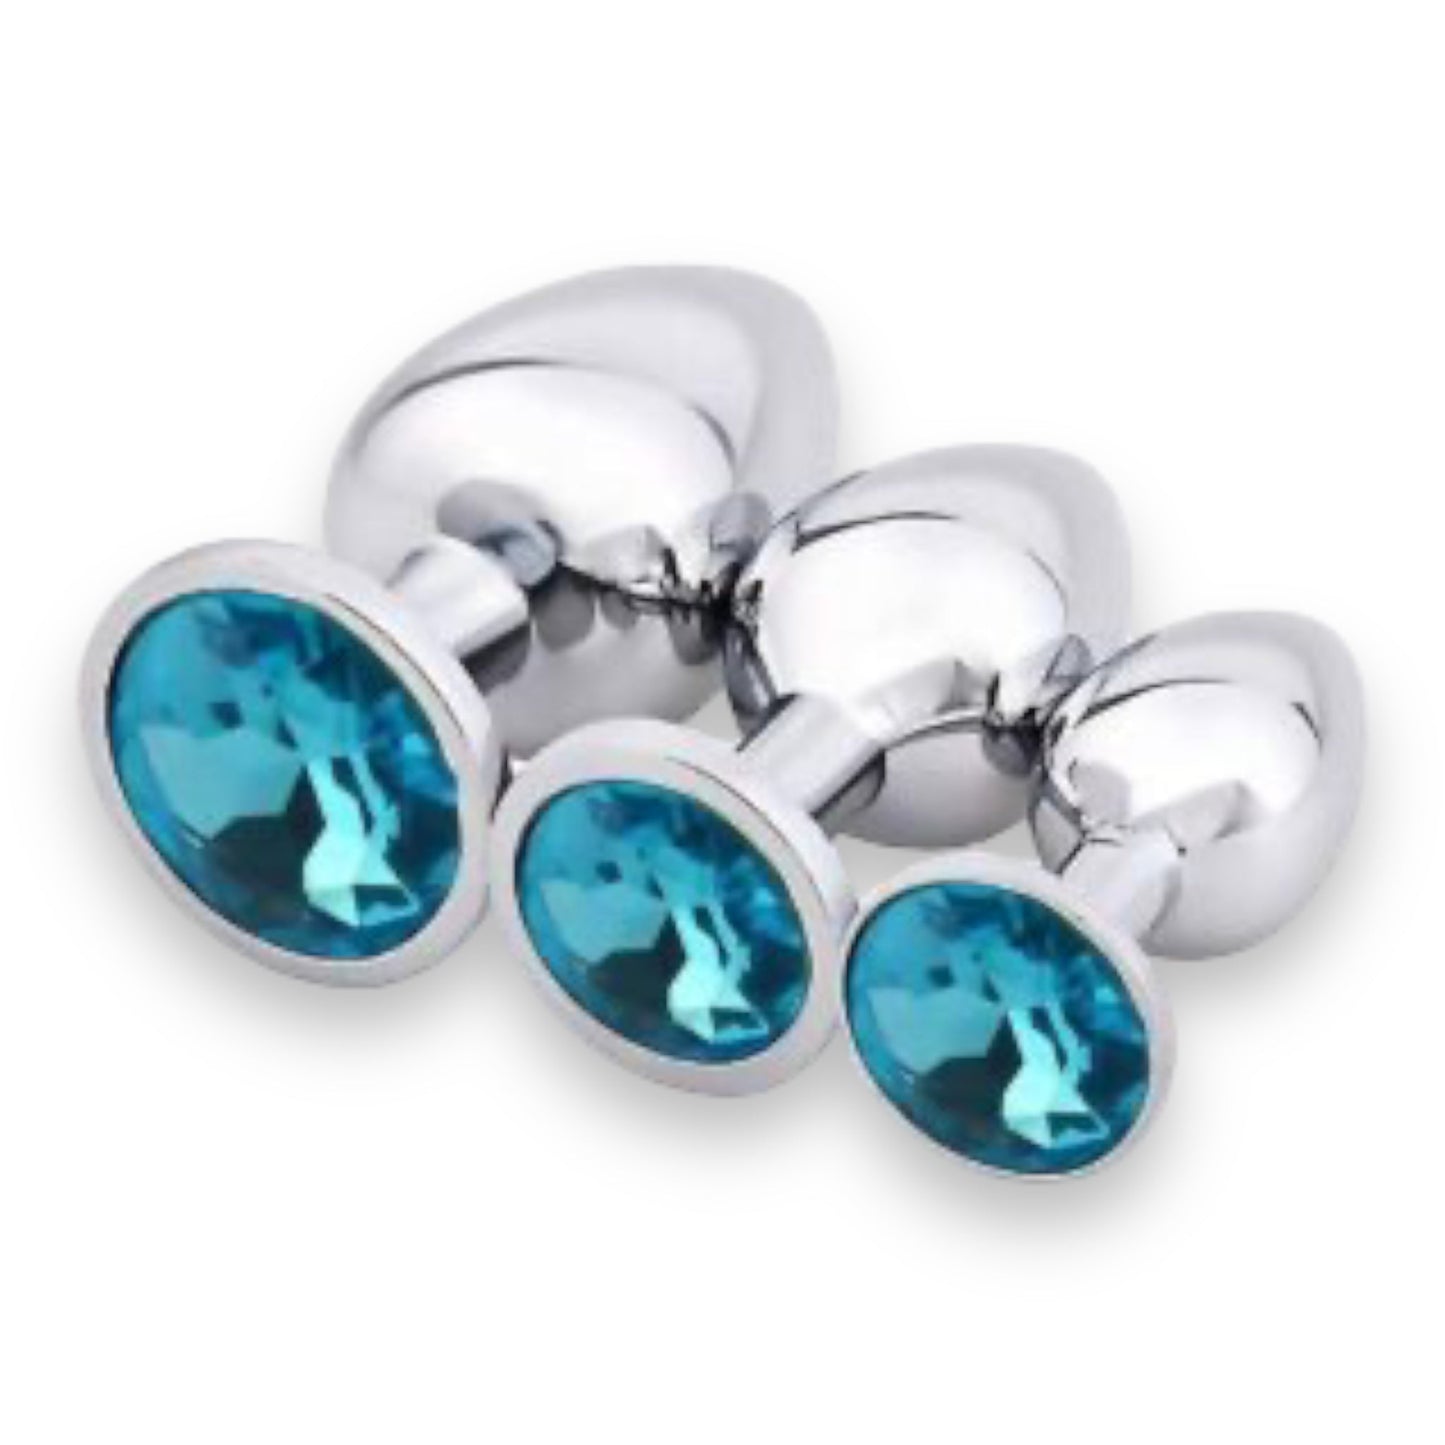 Power Escorts - BR138 - BULK - Metallic Anal Plug With Stone - 3 Pack - 6 Colours - JUST PLASTIC BAG